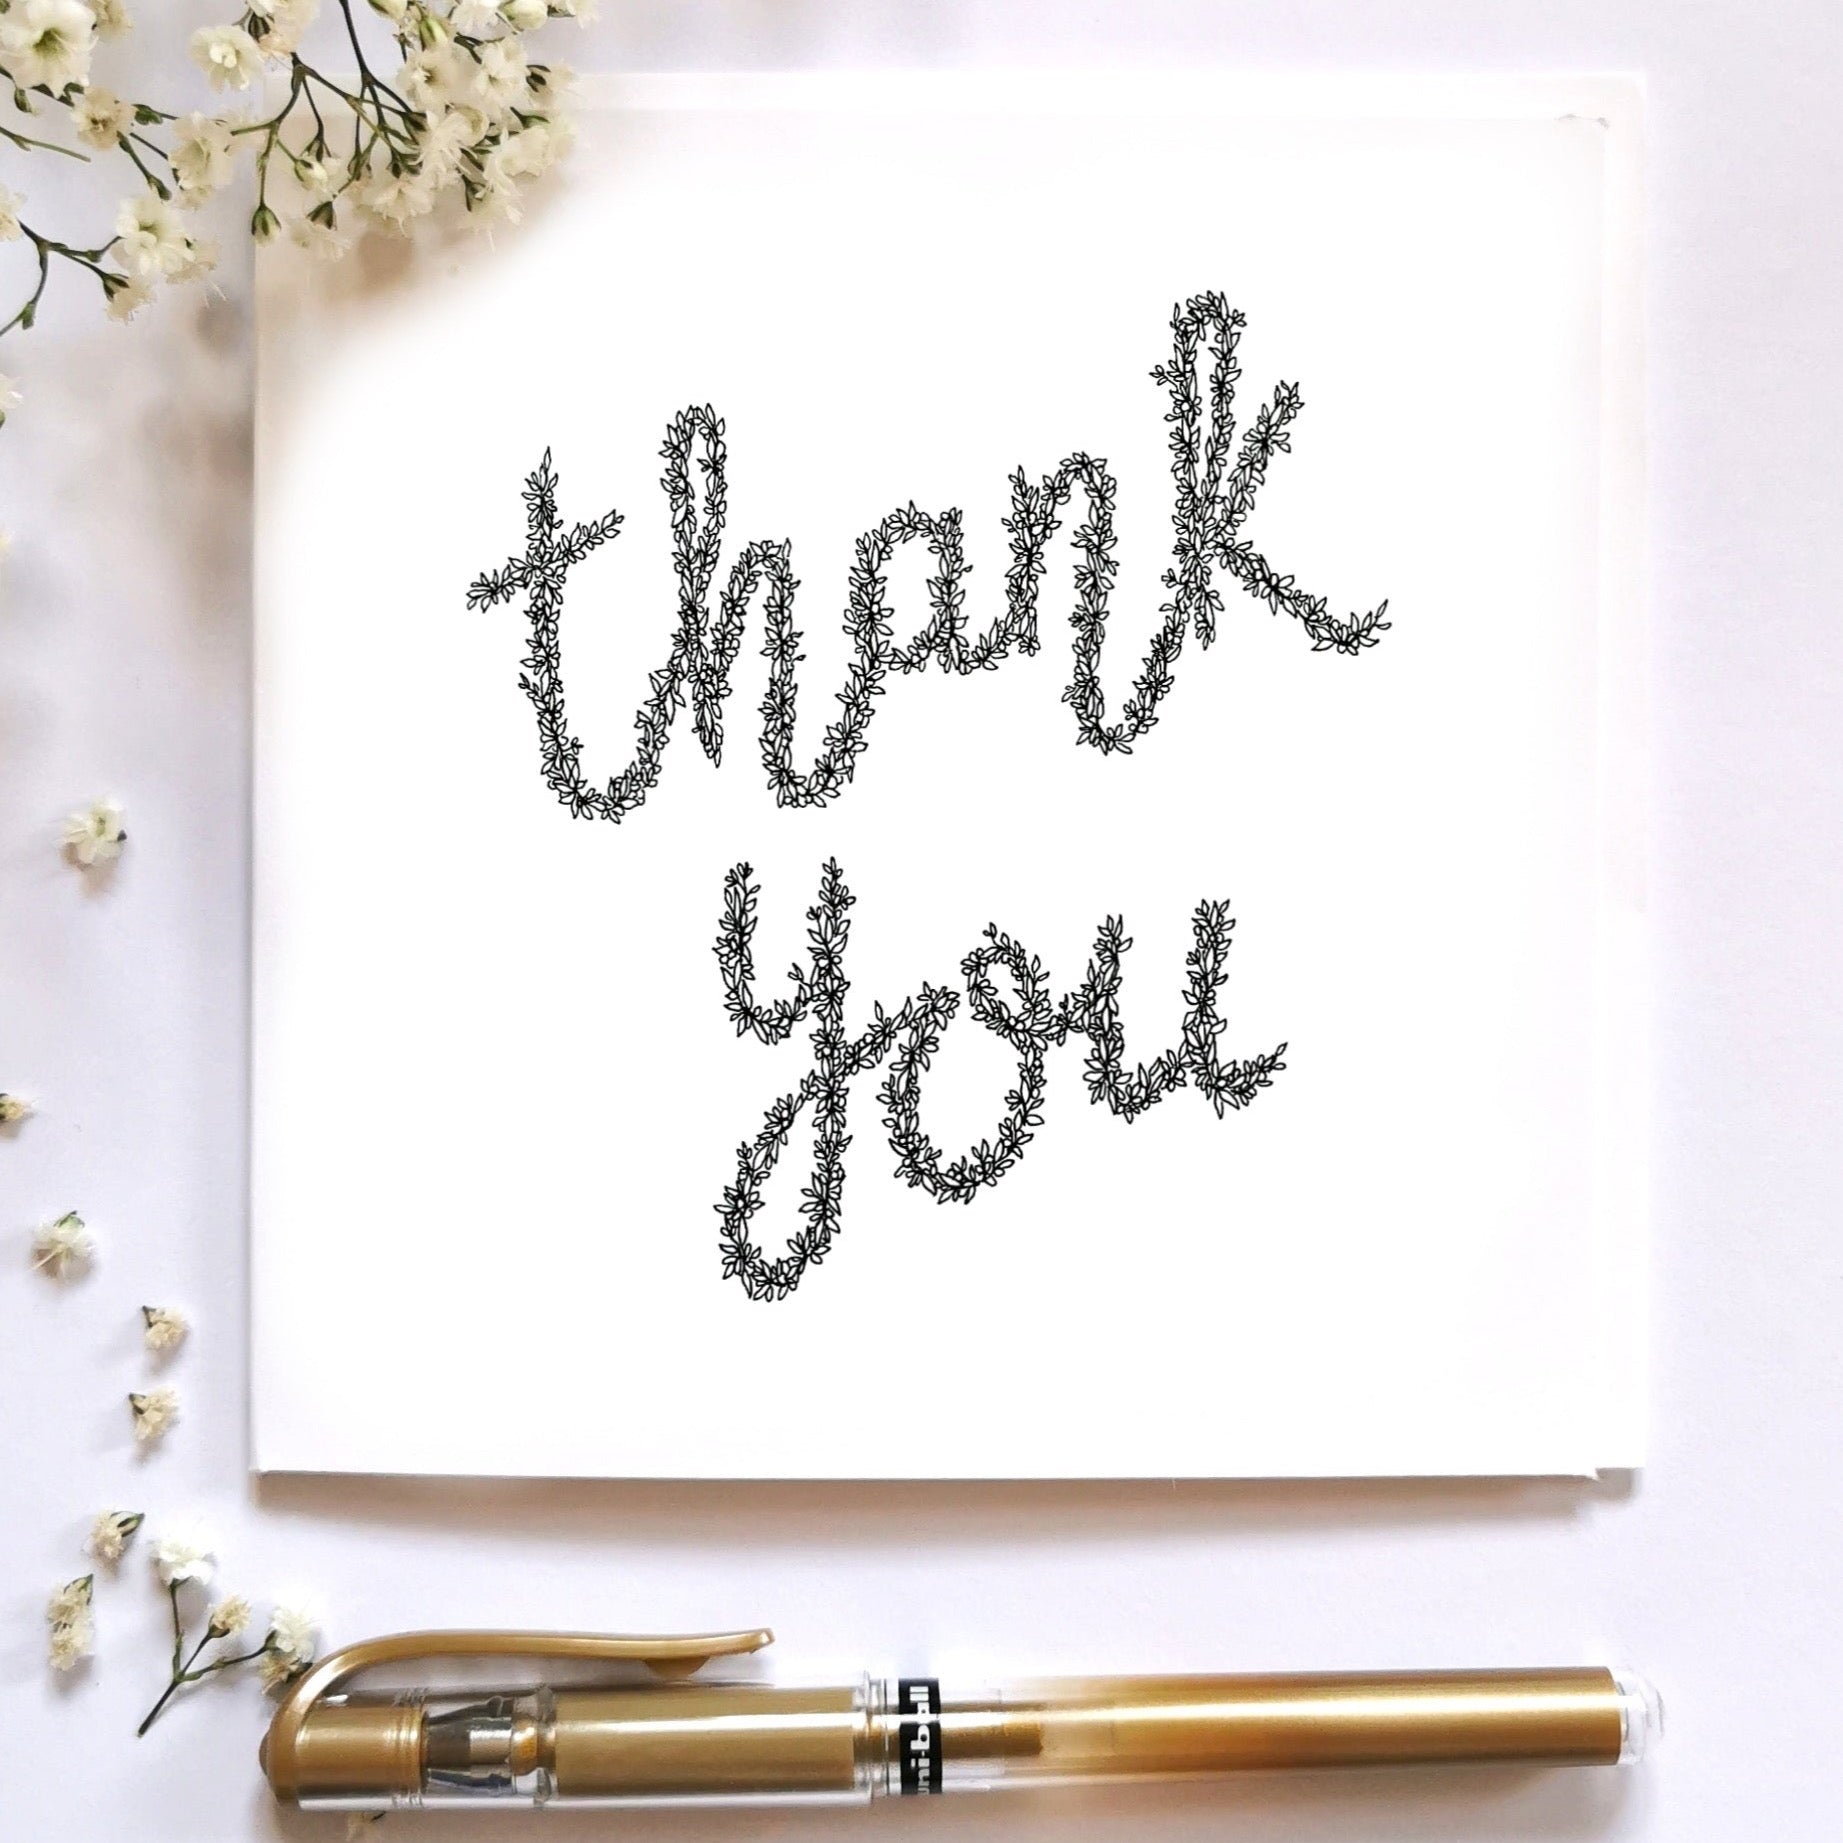 Image shows Thank you card made from black floral drawing. Image laid on cream surface with floral arrangement and gold pen. 